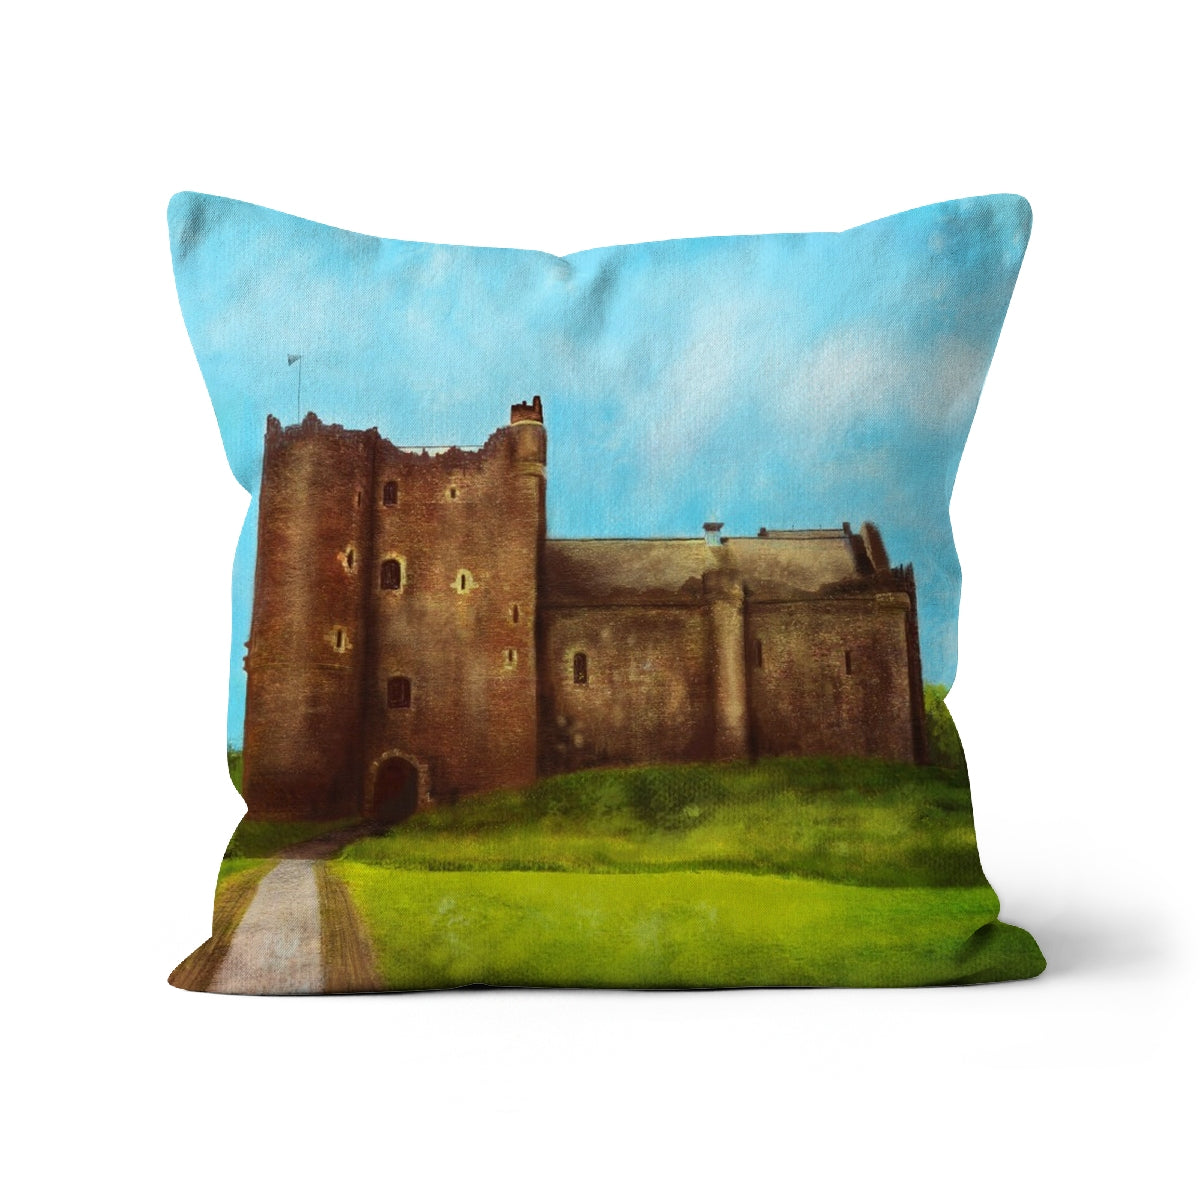 Doune Castle Art Gifts Cushion-Cushions-Historic & Iconic Scotland Art Gallery-Canvas-22"x22"-Paintings, Prints, Homeware, Art Gifts From Scotland By Scottish Artist Kevin Hunter